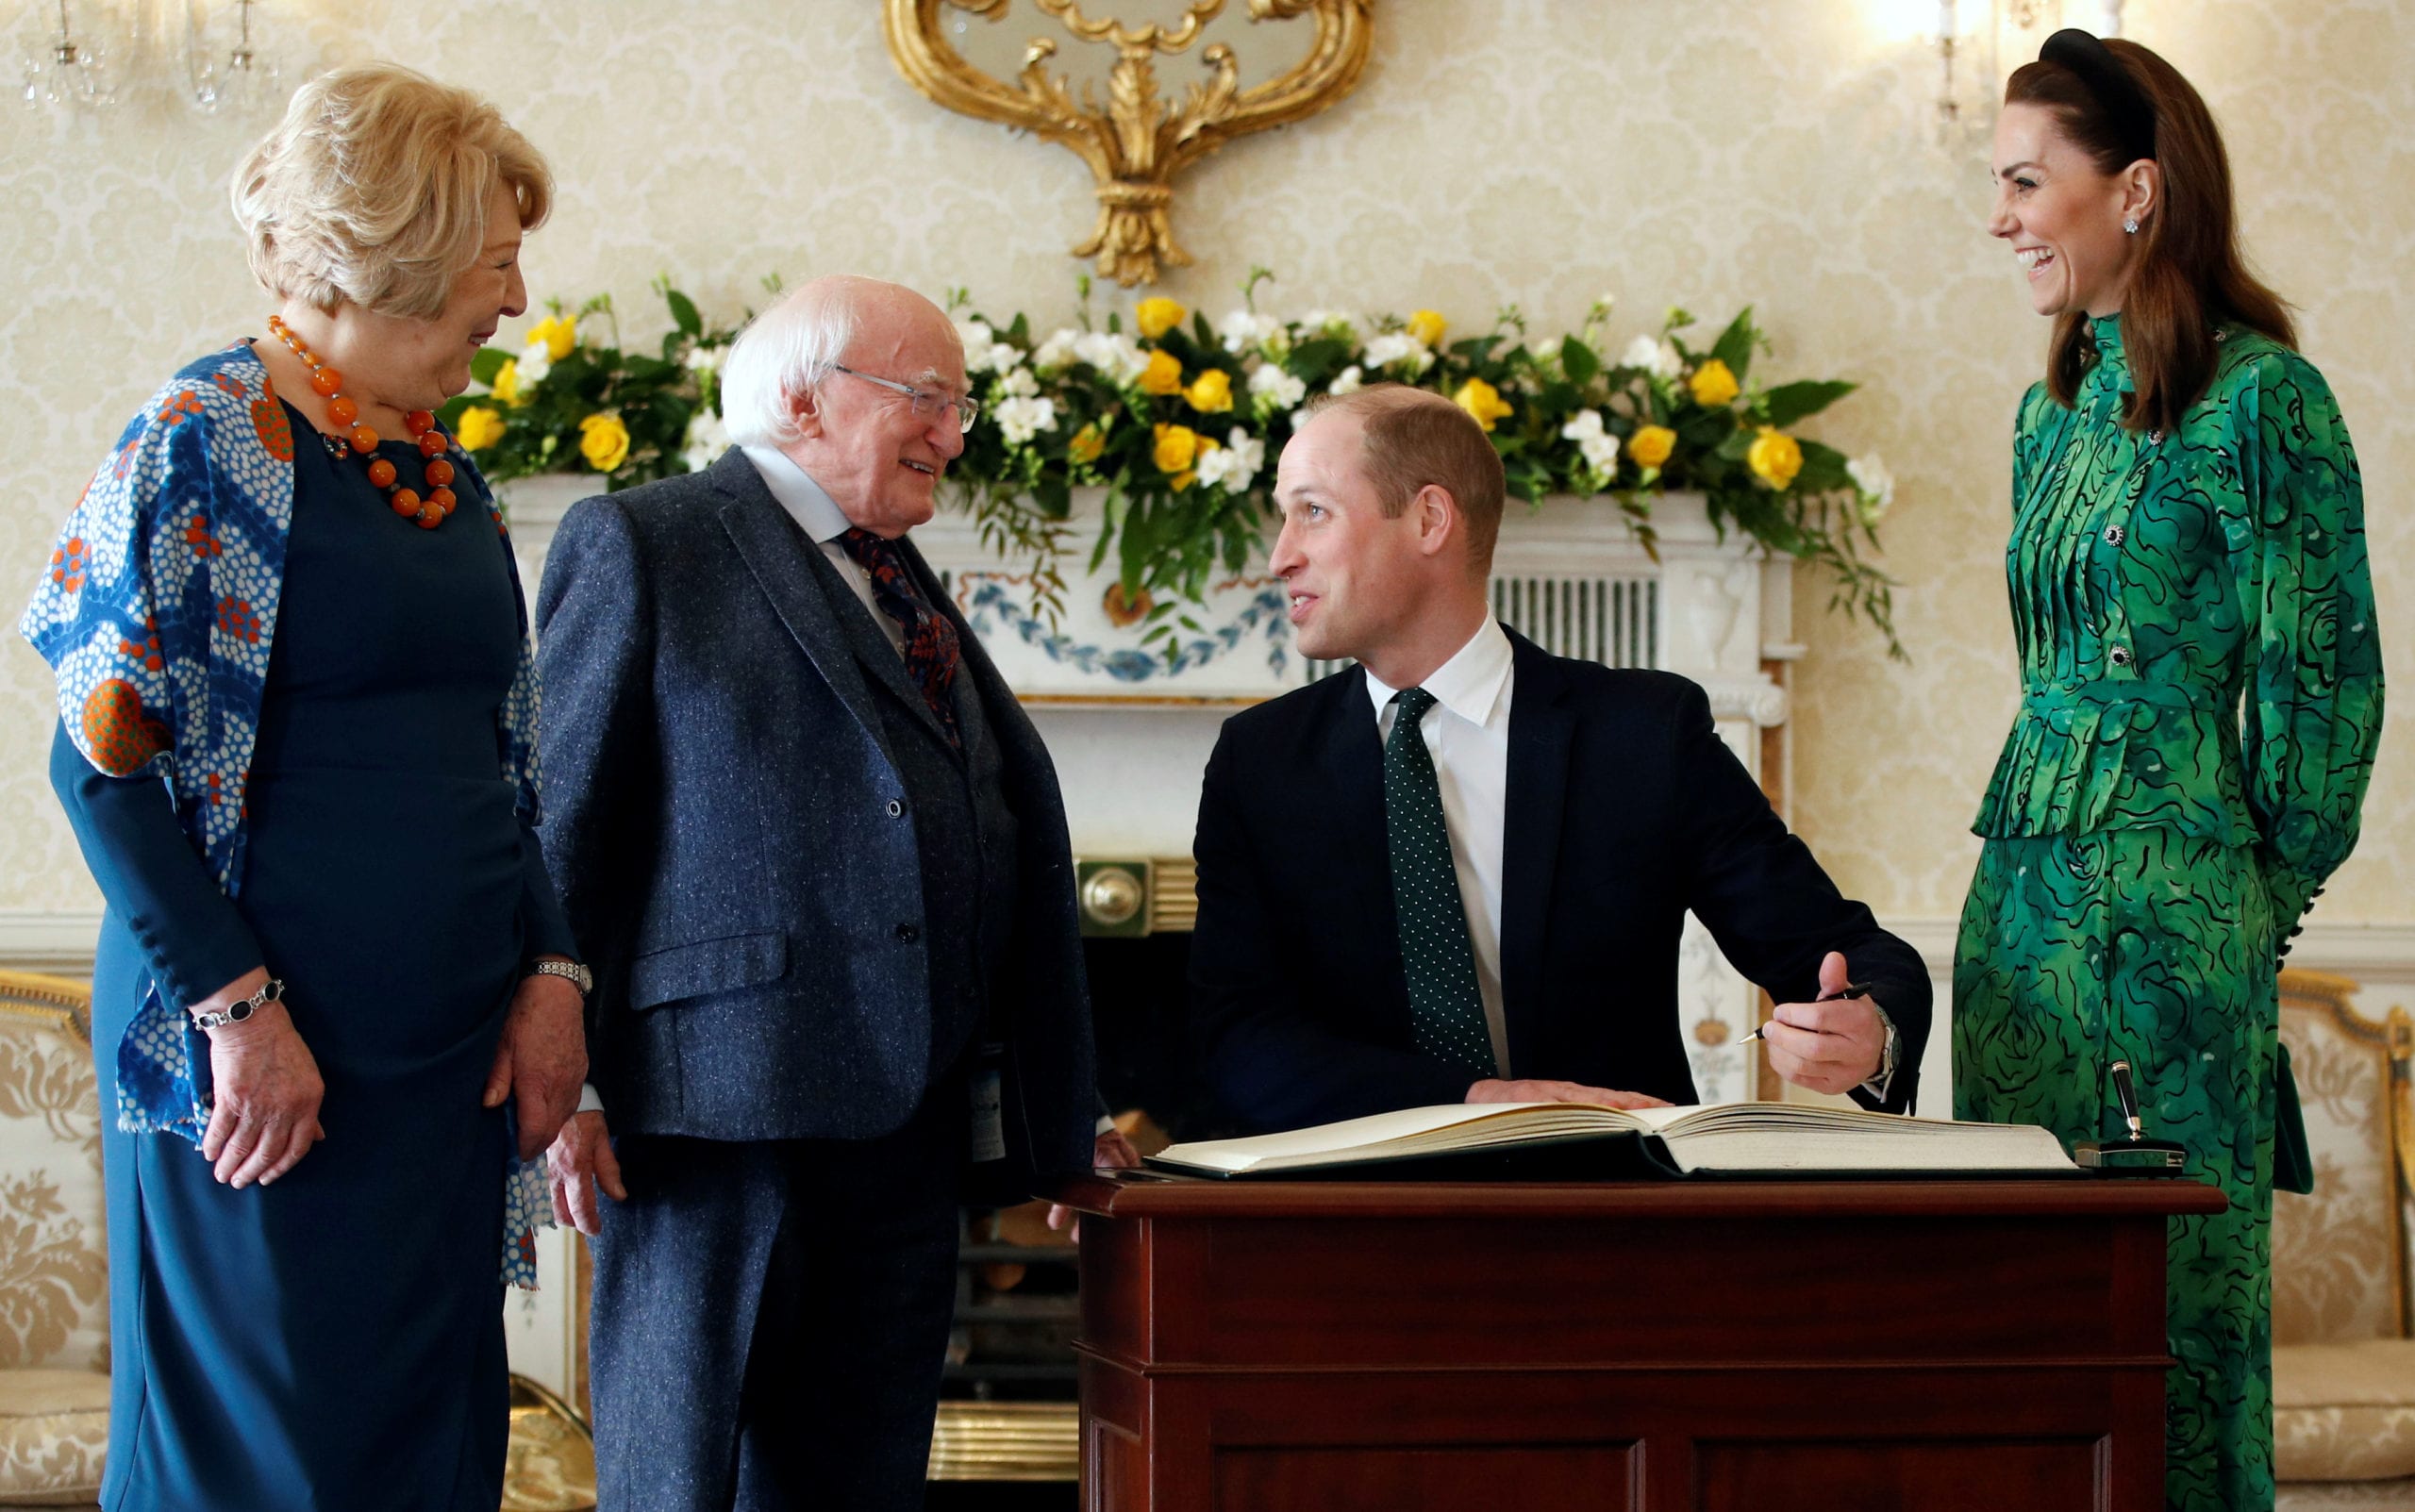 Britain's Prince William sings a visitors book next to his wife Catherine, Duchess of Cambridge, as they meet with Ireland's President Michael D. Higgins and his wife Sabina, at the official presidential residence Aras an Uachtarain in Dublin, Ireland, March 3, 2020. REUTERS/Phil Noble/Pool